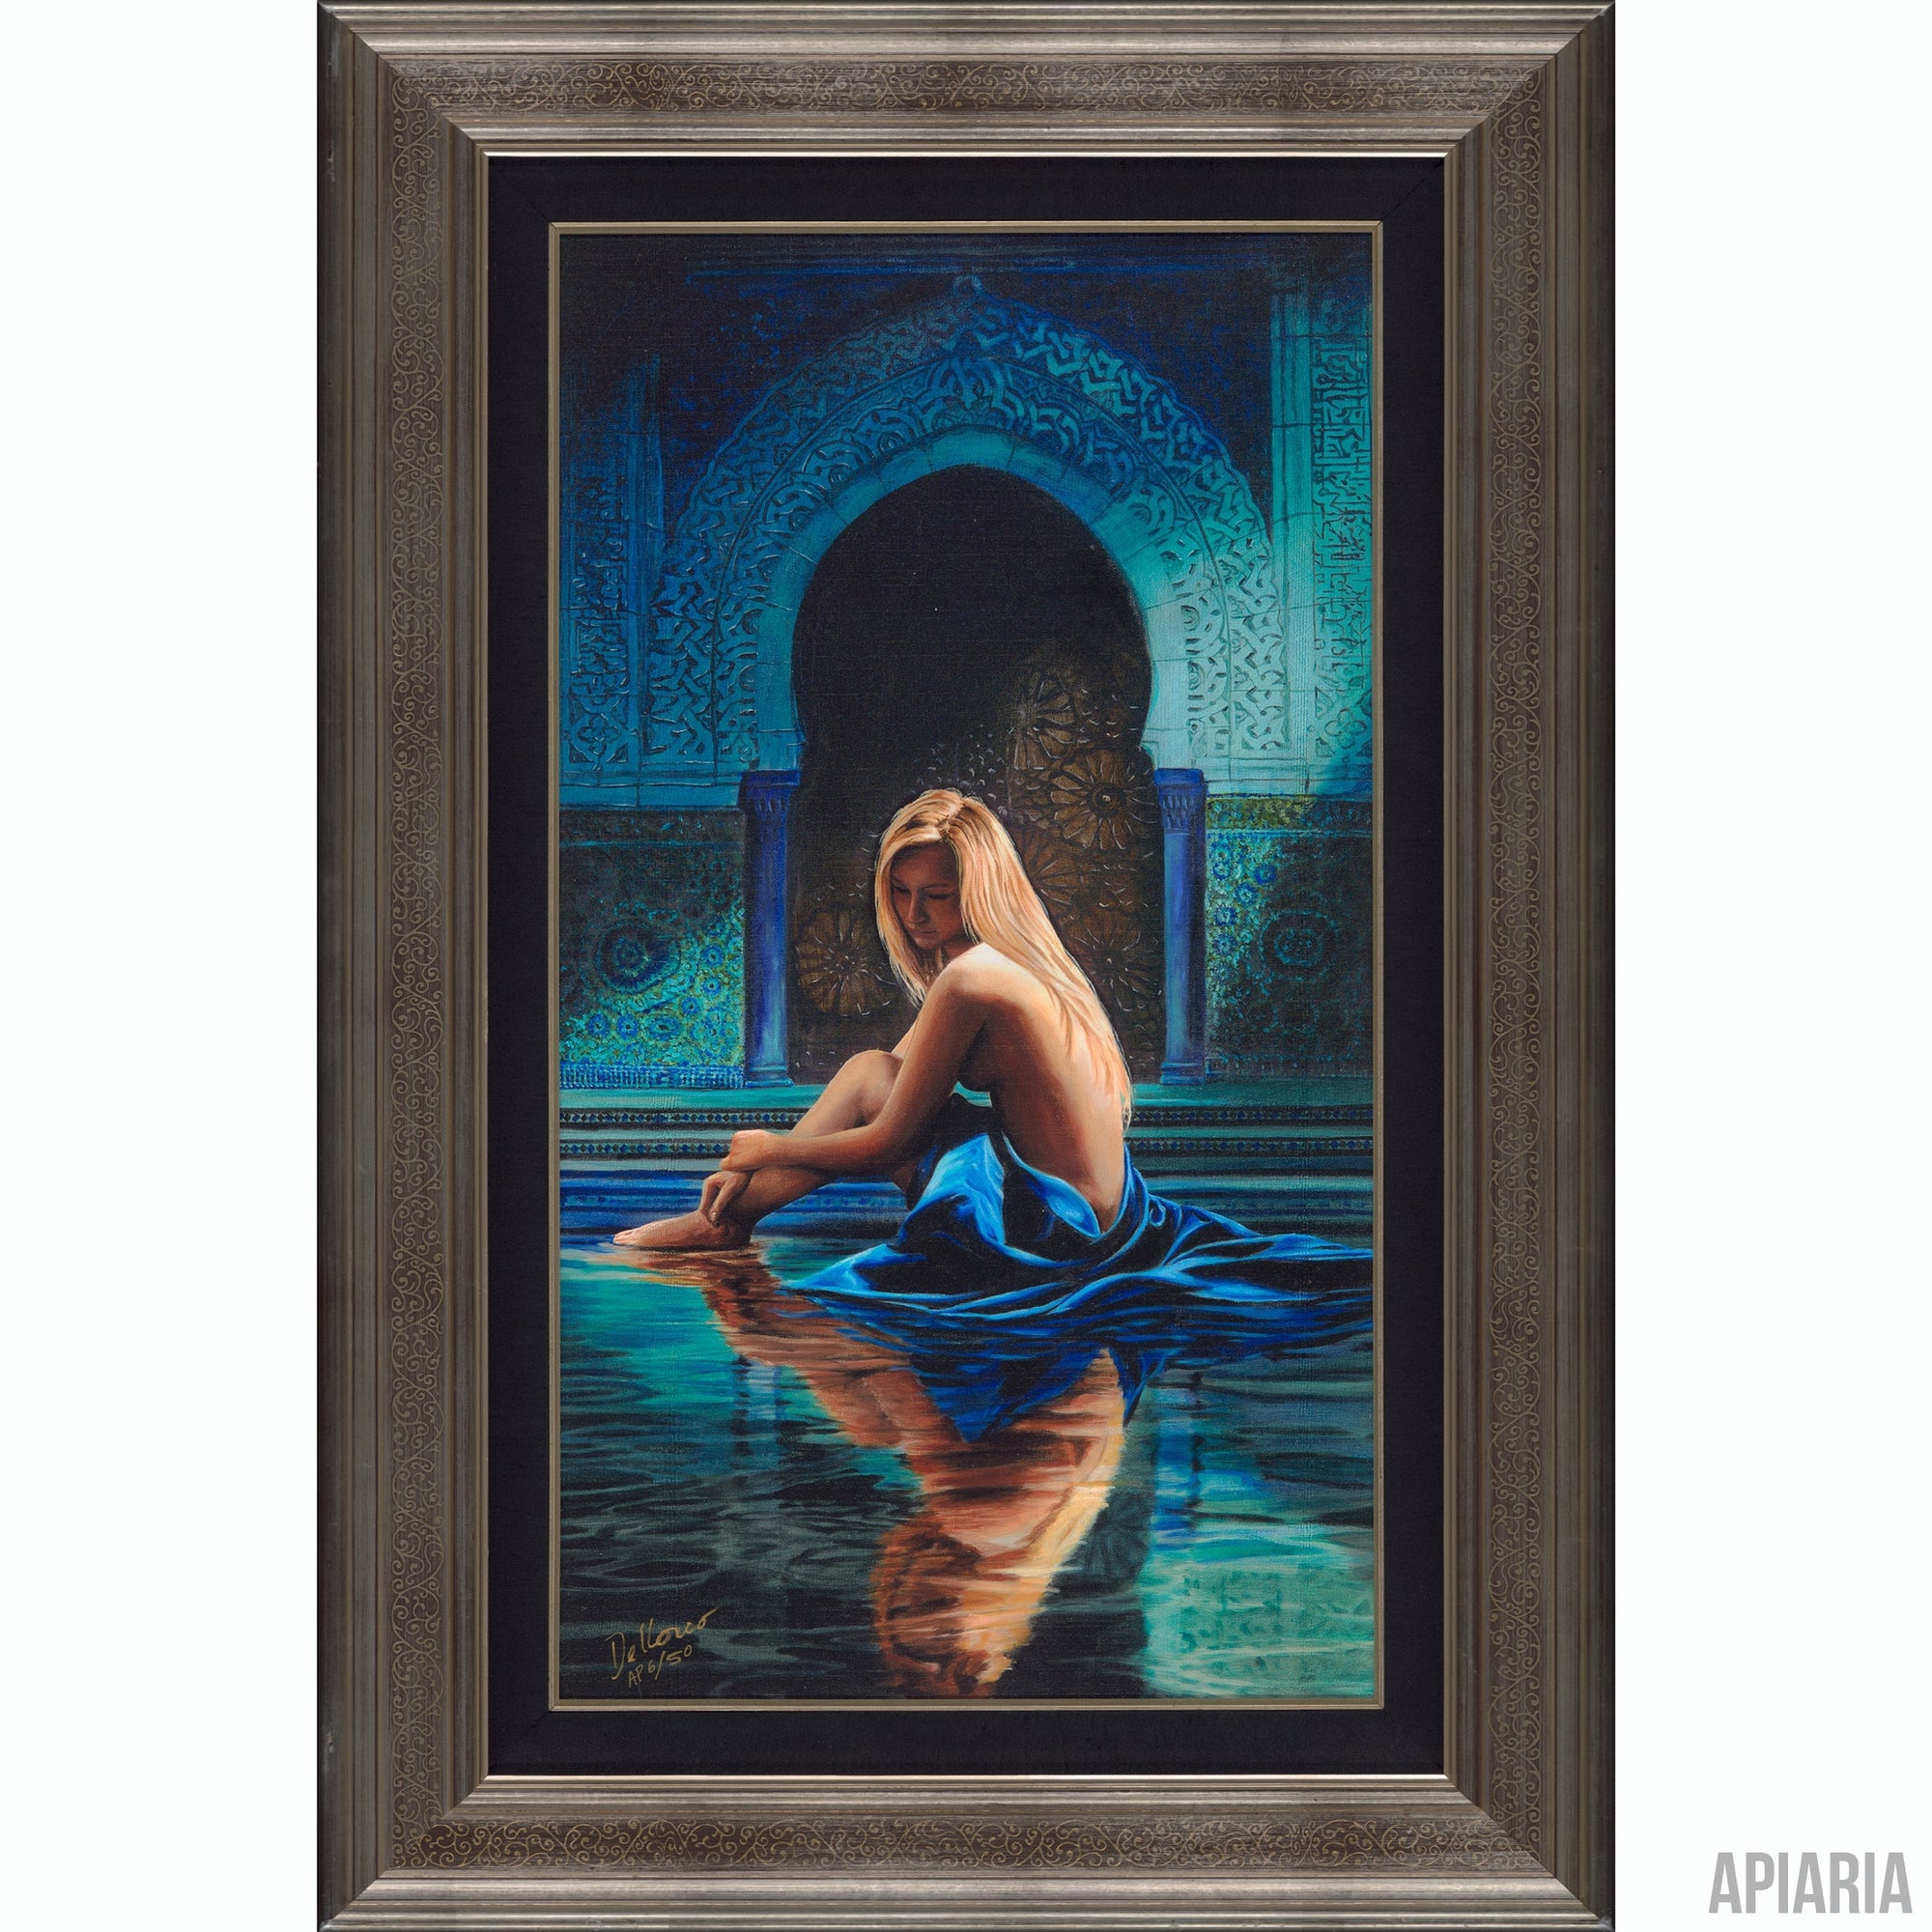 Chris Dellorco "Reflections"-Framed Art-Apiaria